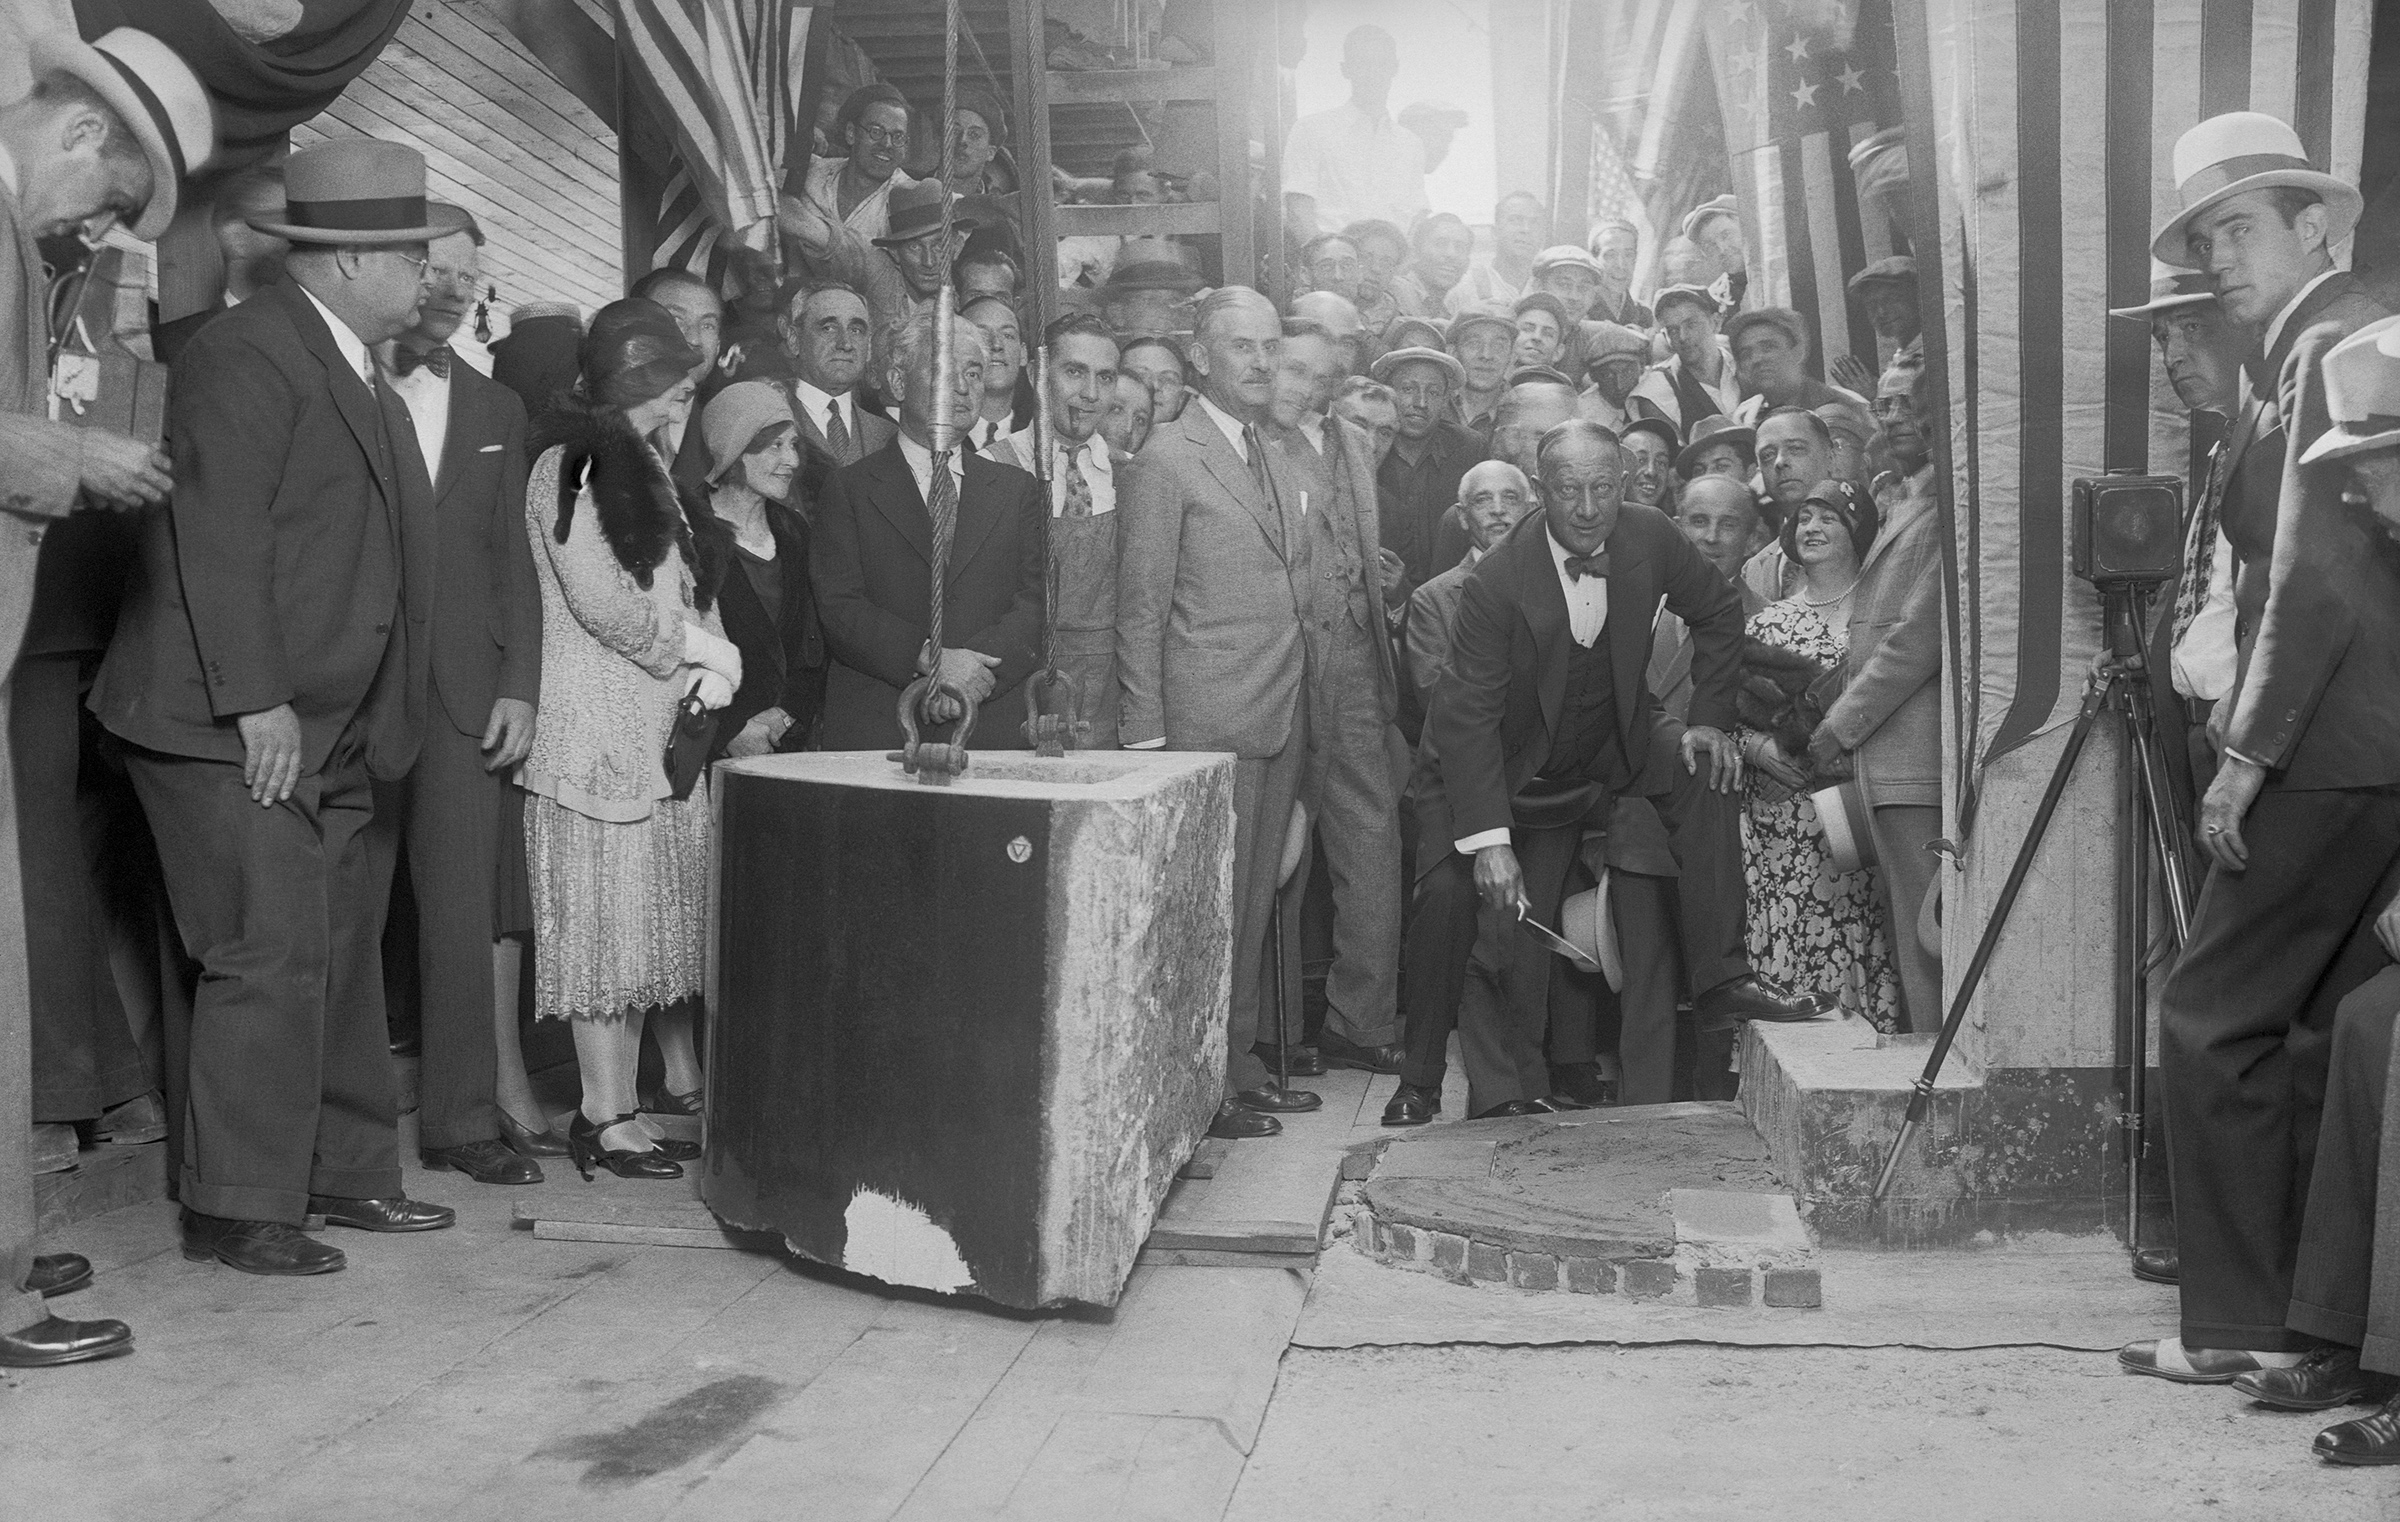 As possessor of a gold membership card in the bricklayers' union, Alfred Smith performed a thorough job when he laid the cornerstone for the Empire State Building on Fifth avenue and 34th street, New York City, before a crowd of onlookers on Sept. 9, 1930.